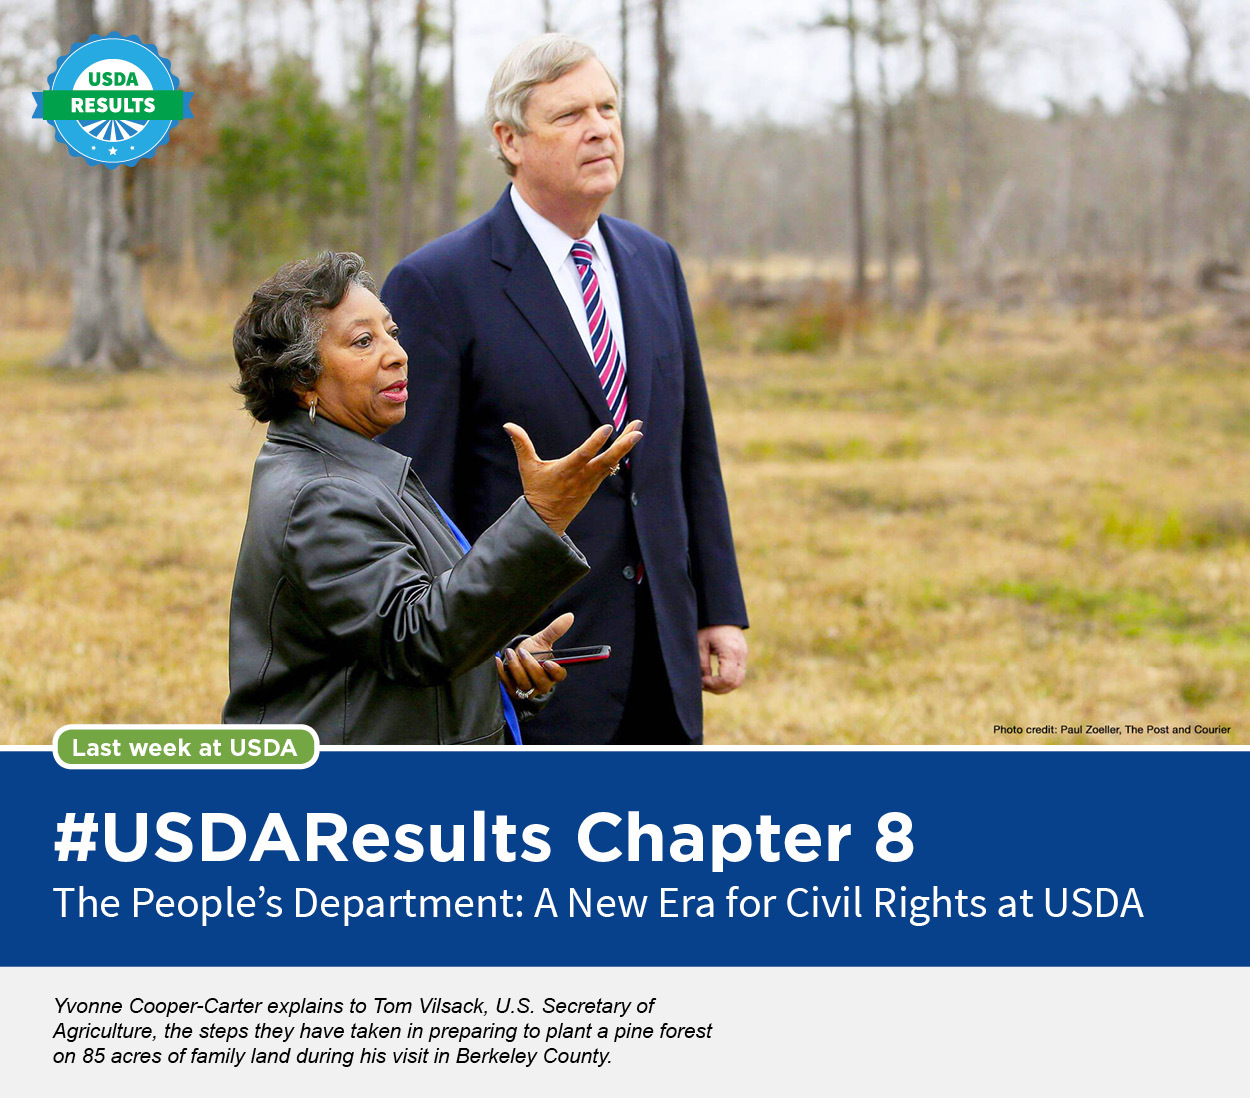 Yvonne Cooper-Carter explains to Tom Vilsack, U.S. Secretary of Agriculture, the steps they have taken in preparing to plant a pine forest on 85 acres